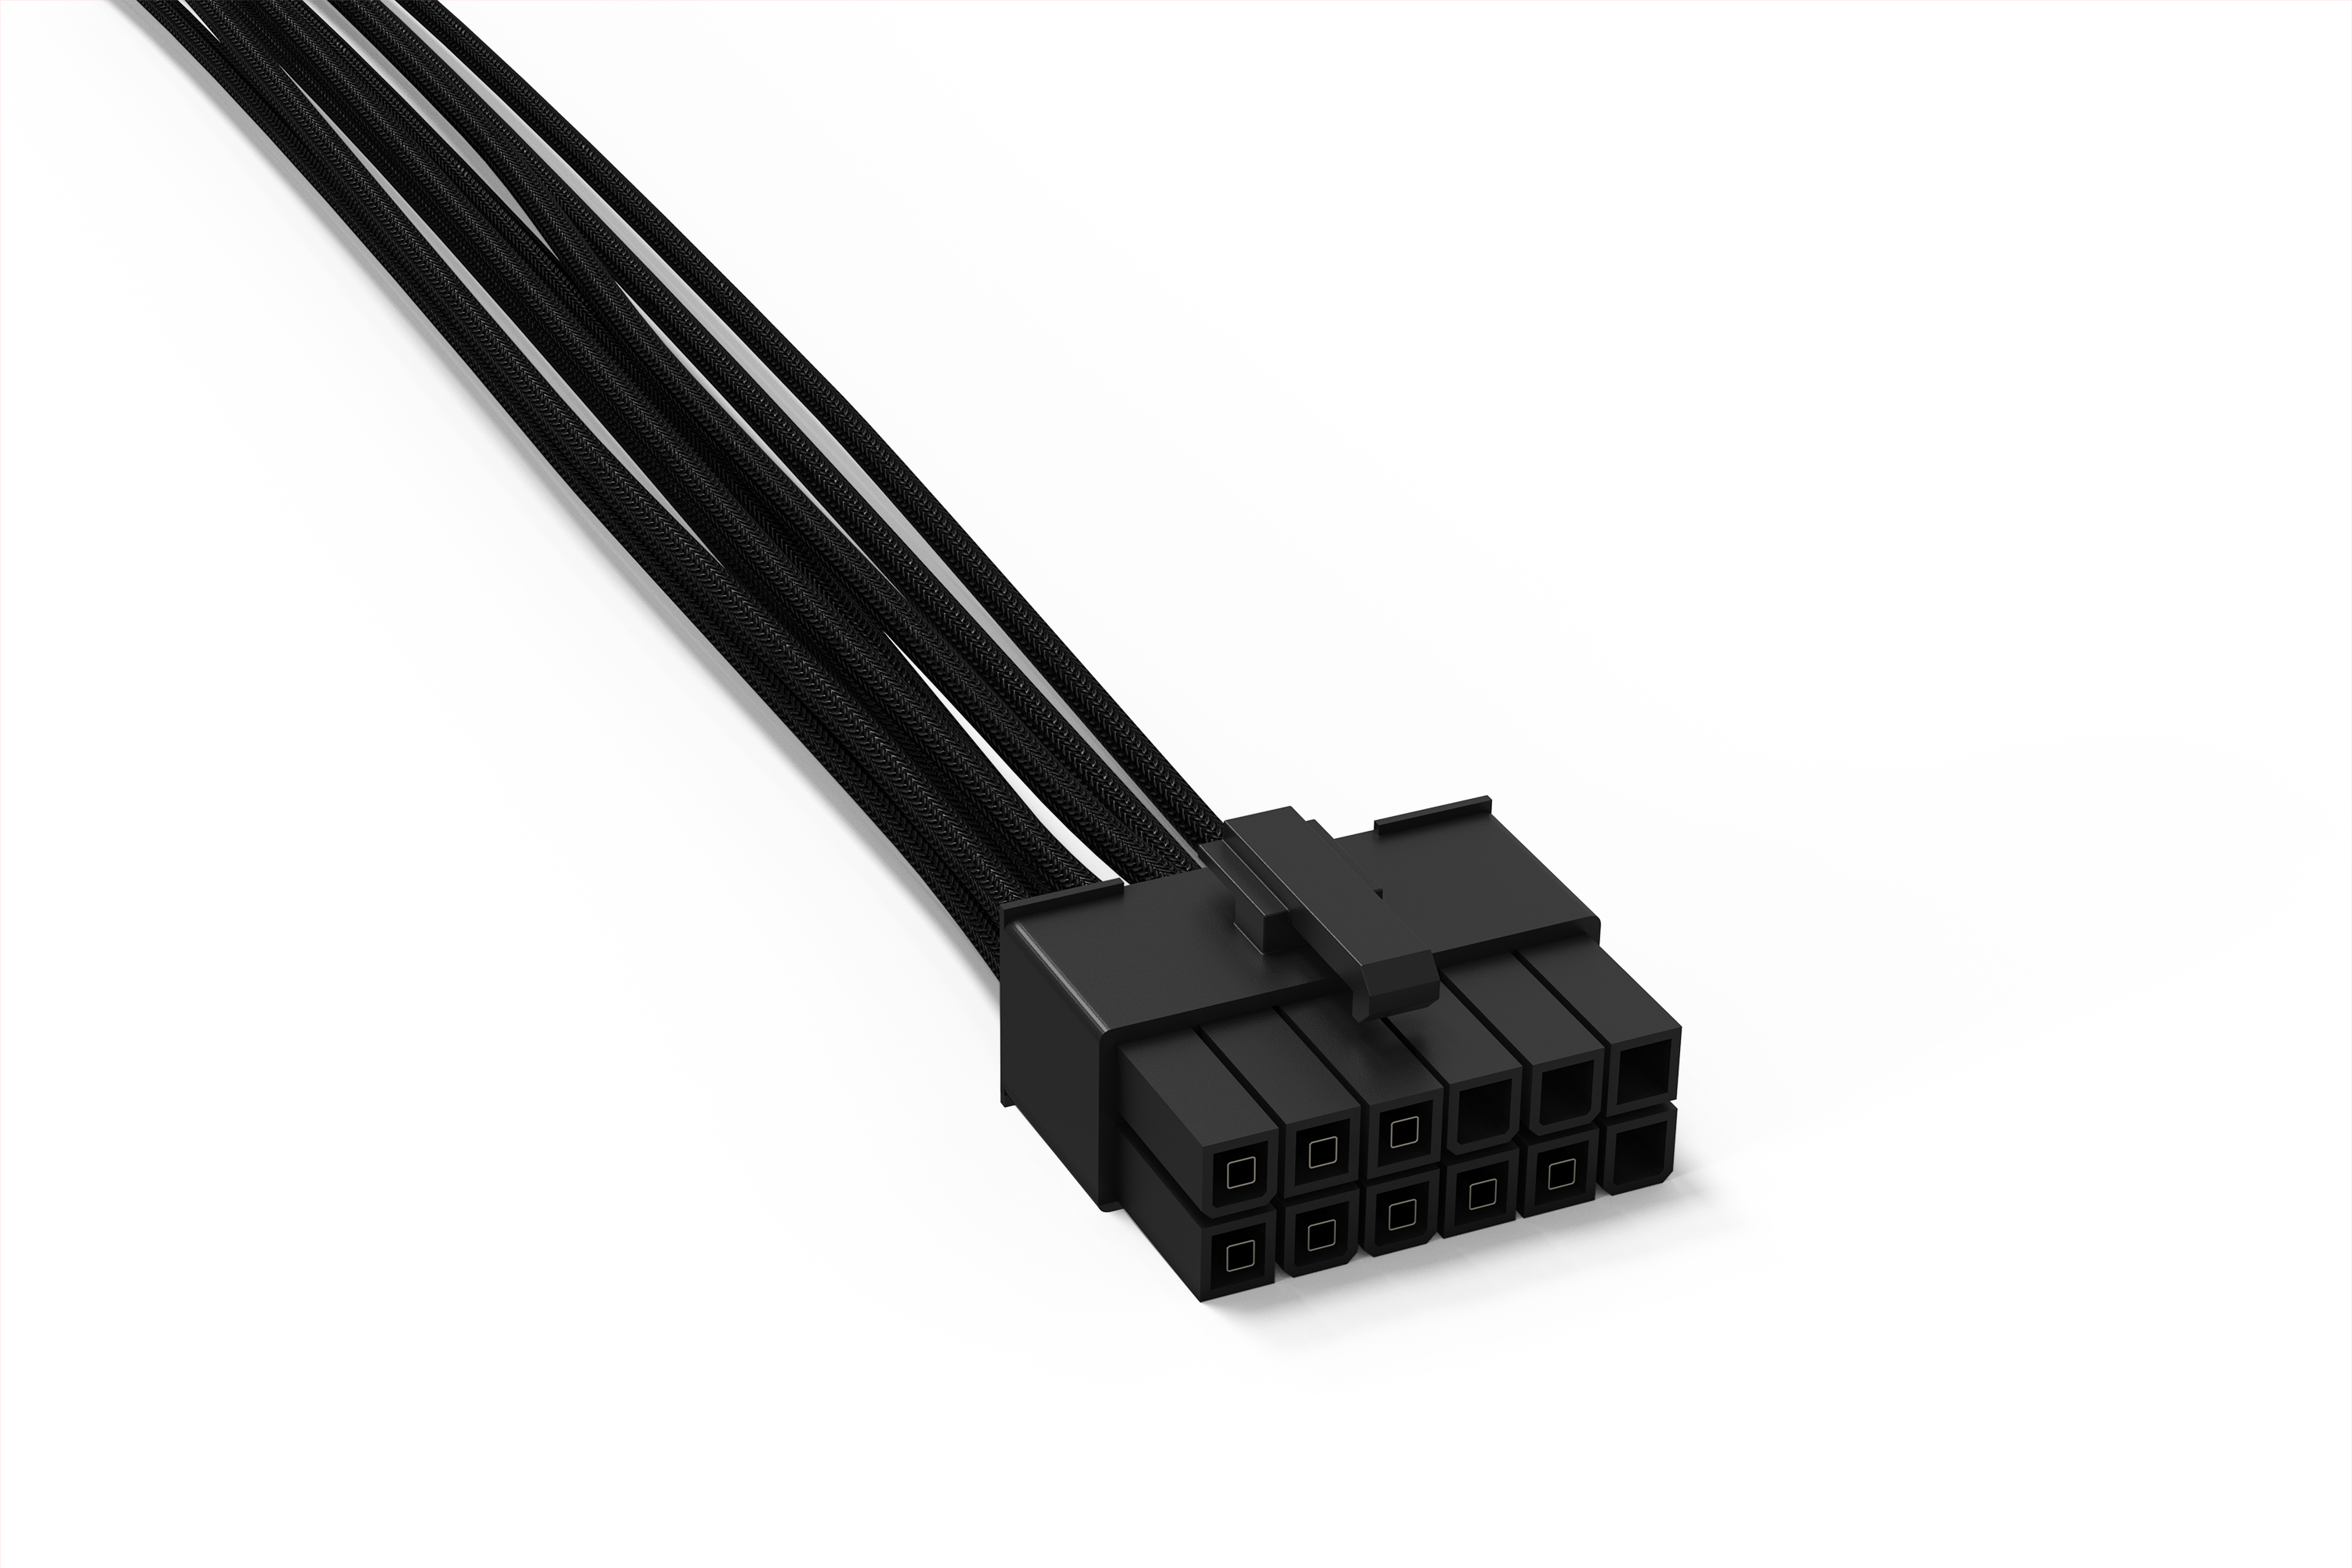 POWER CABLE | from CS-6610 quiet! be